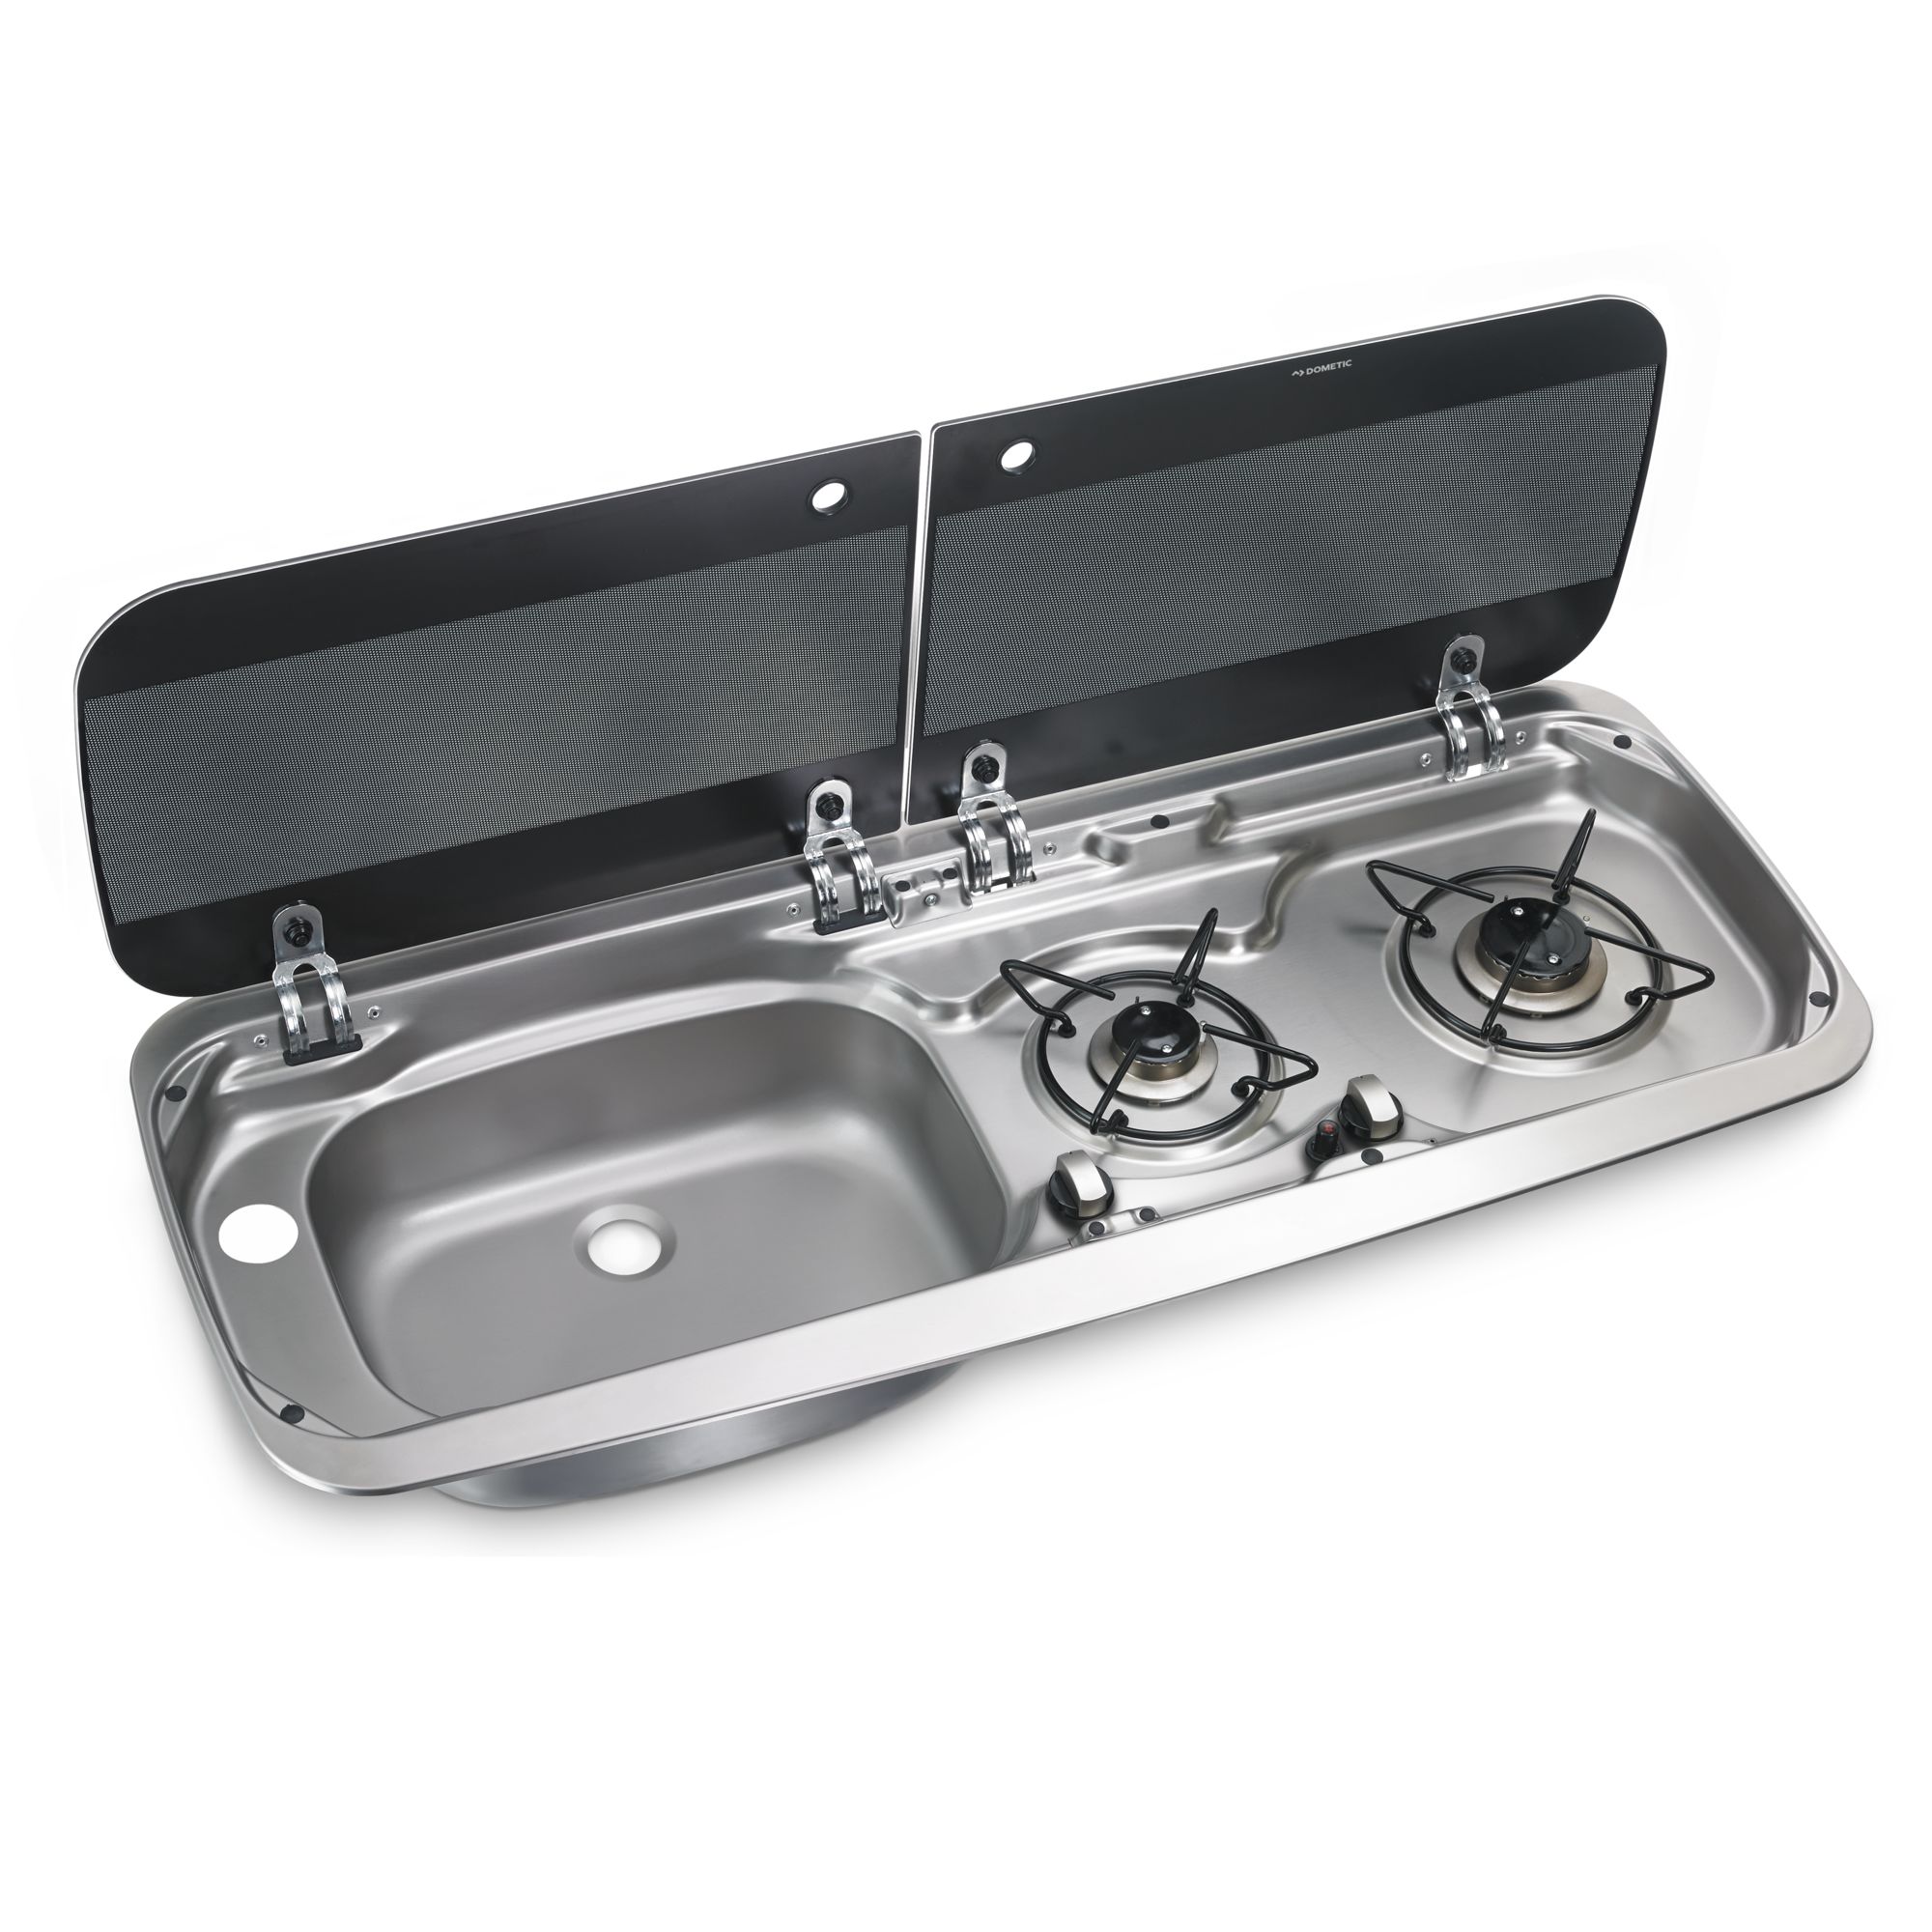 Dometic HSG 2370L 2-burner gas hob & sink (left) combination with glass lid